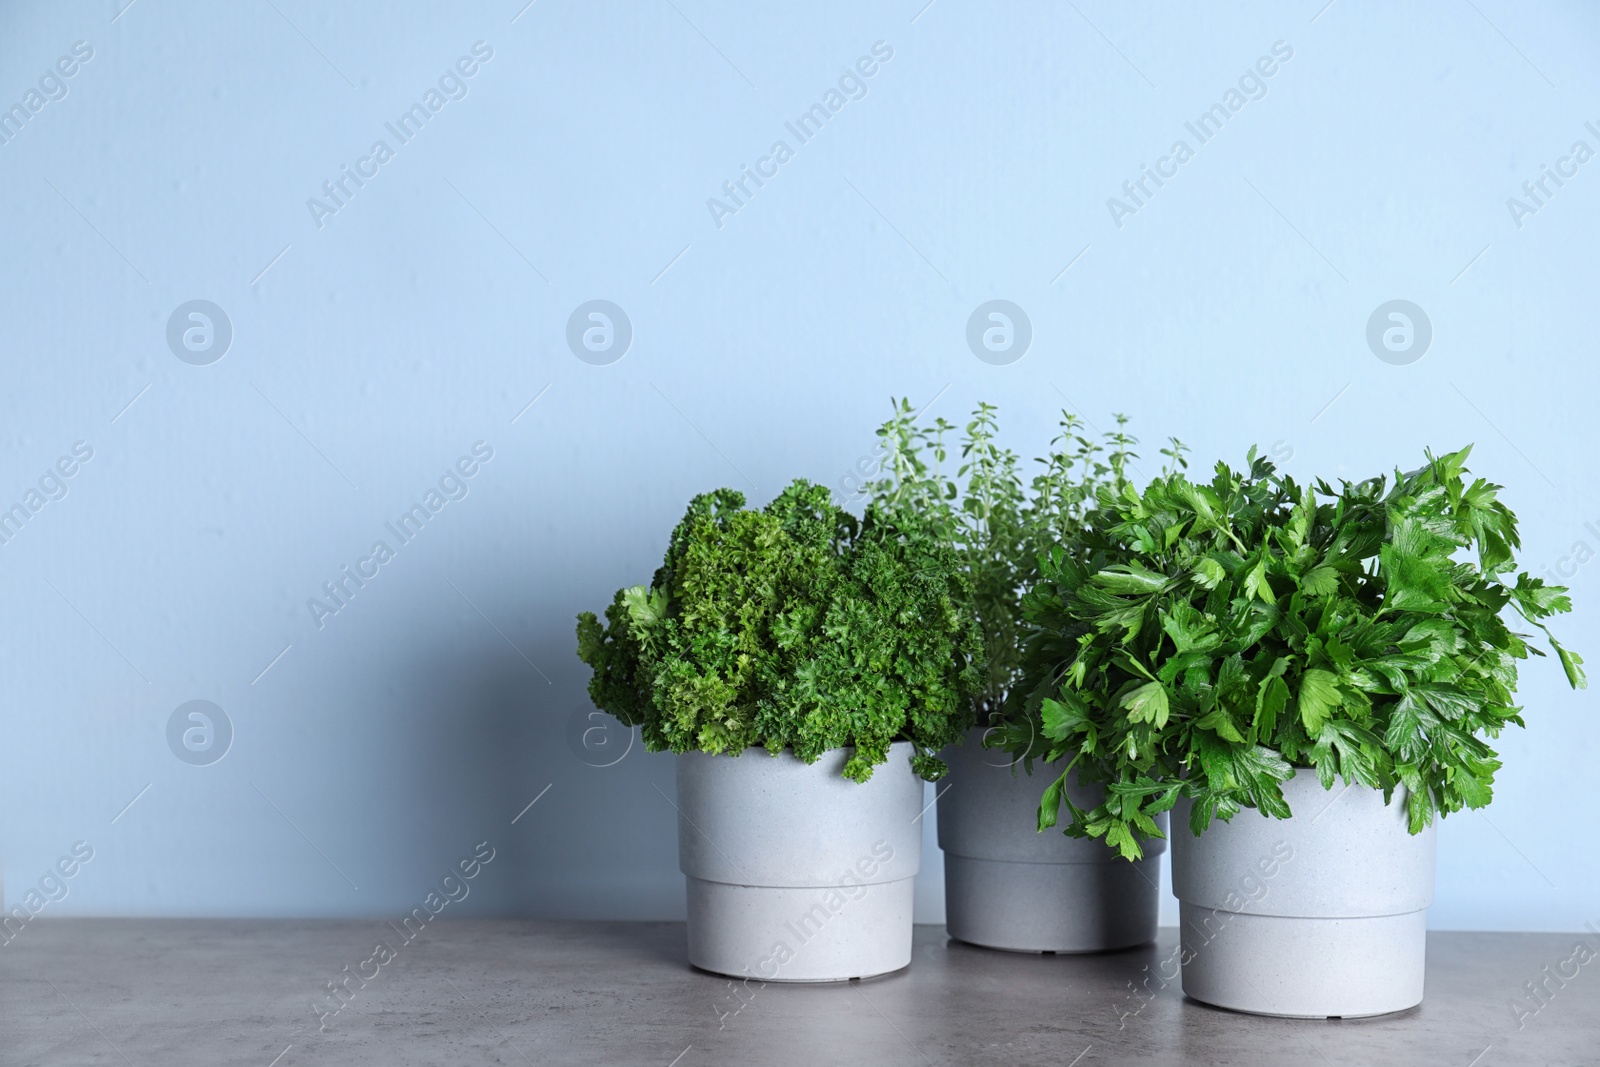 Photo of Seedlings of different aromatic herbs on grey marble table near blue wall